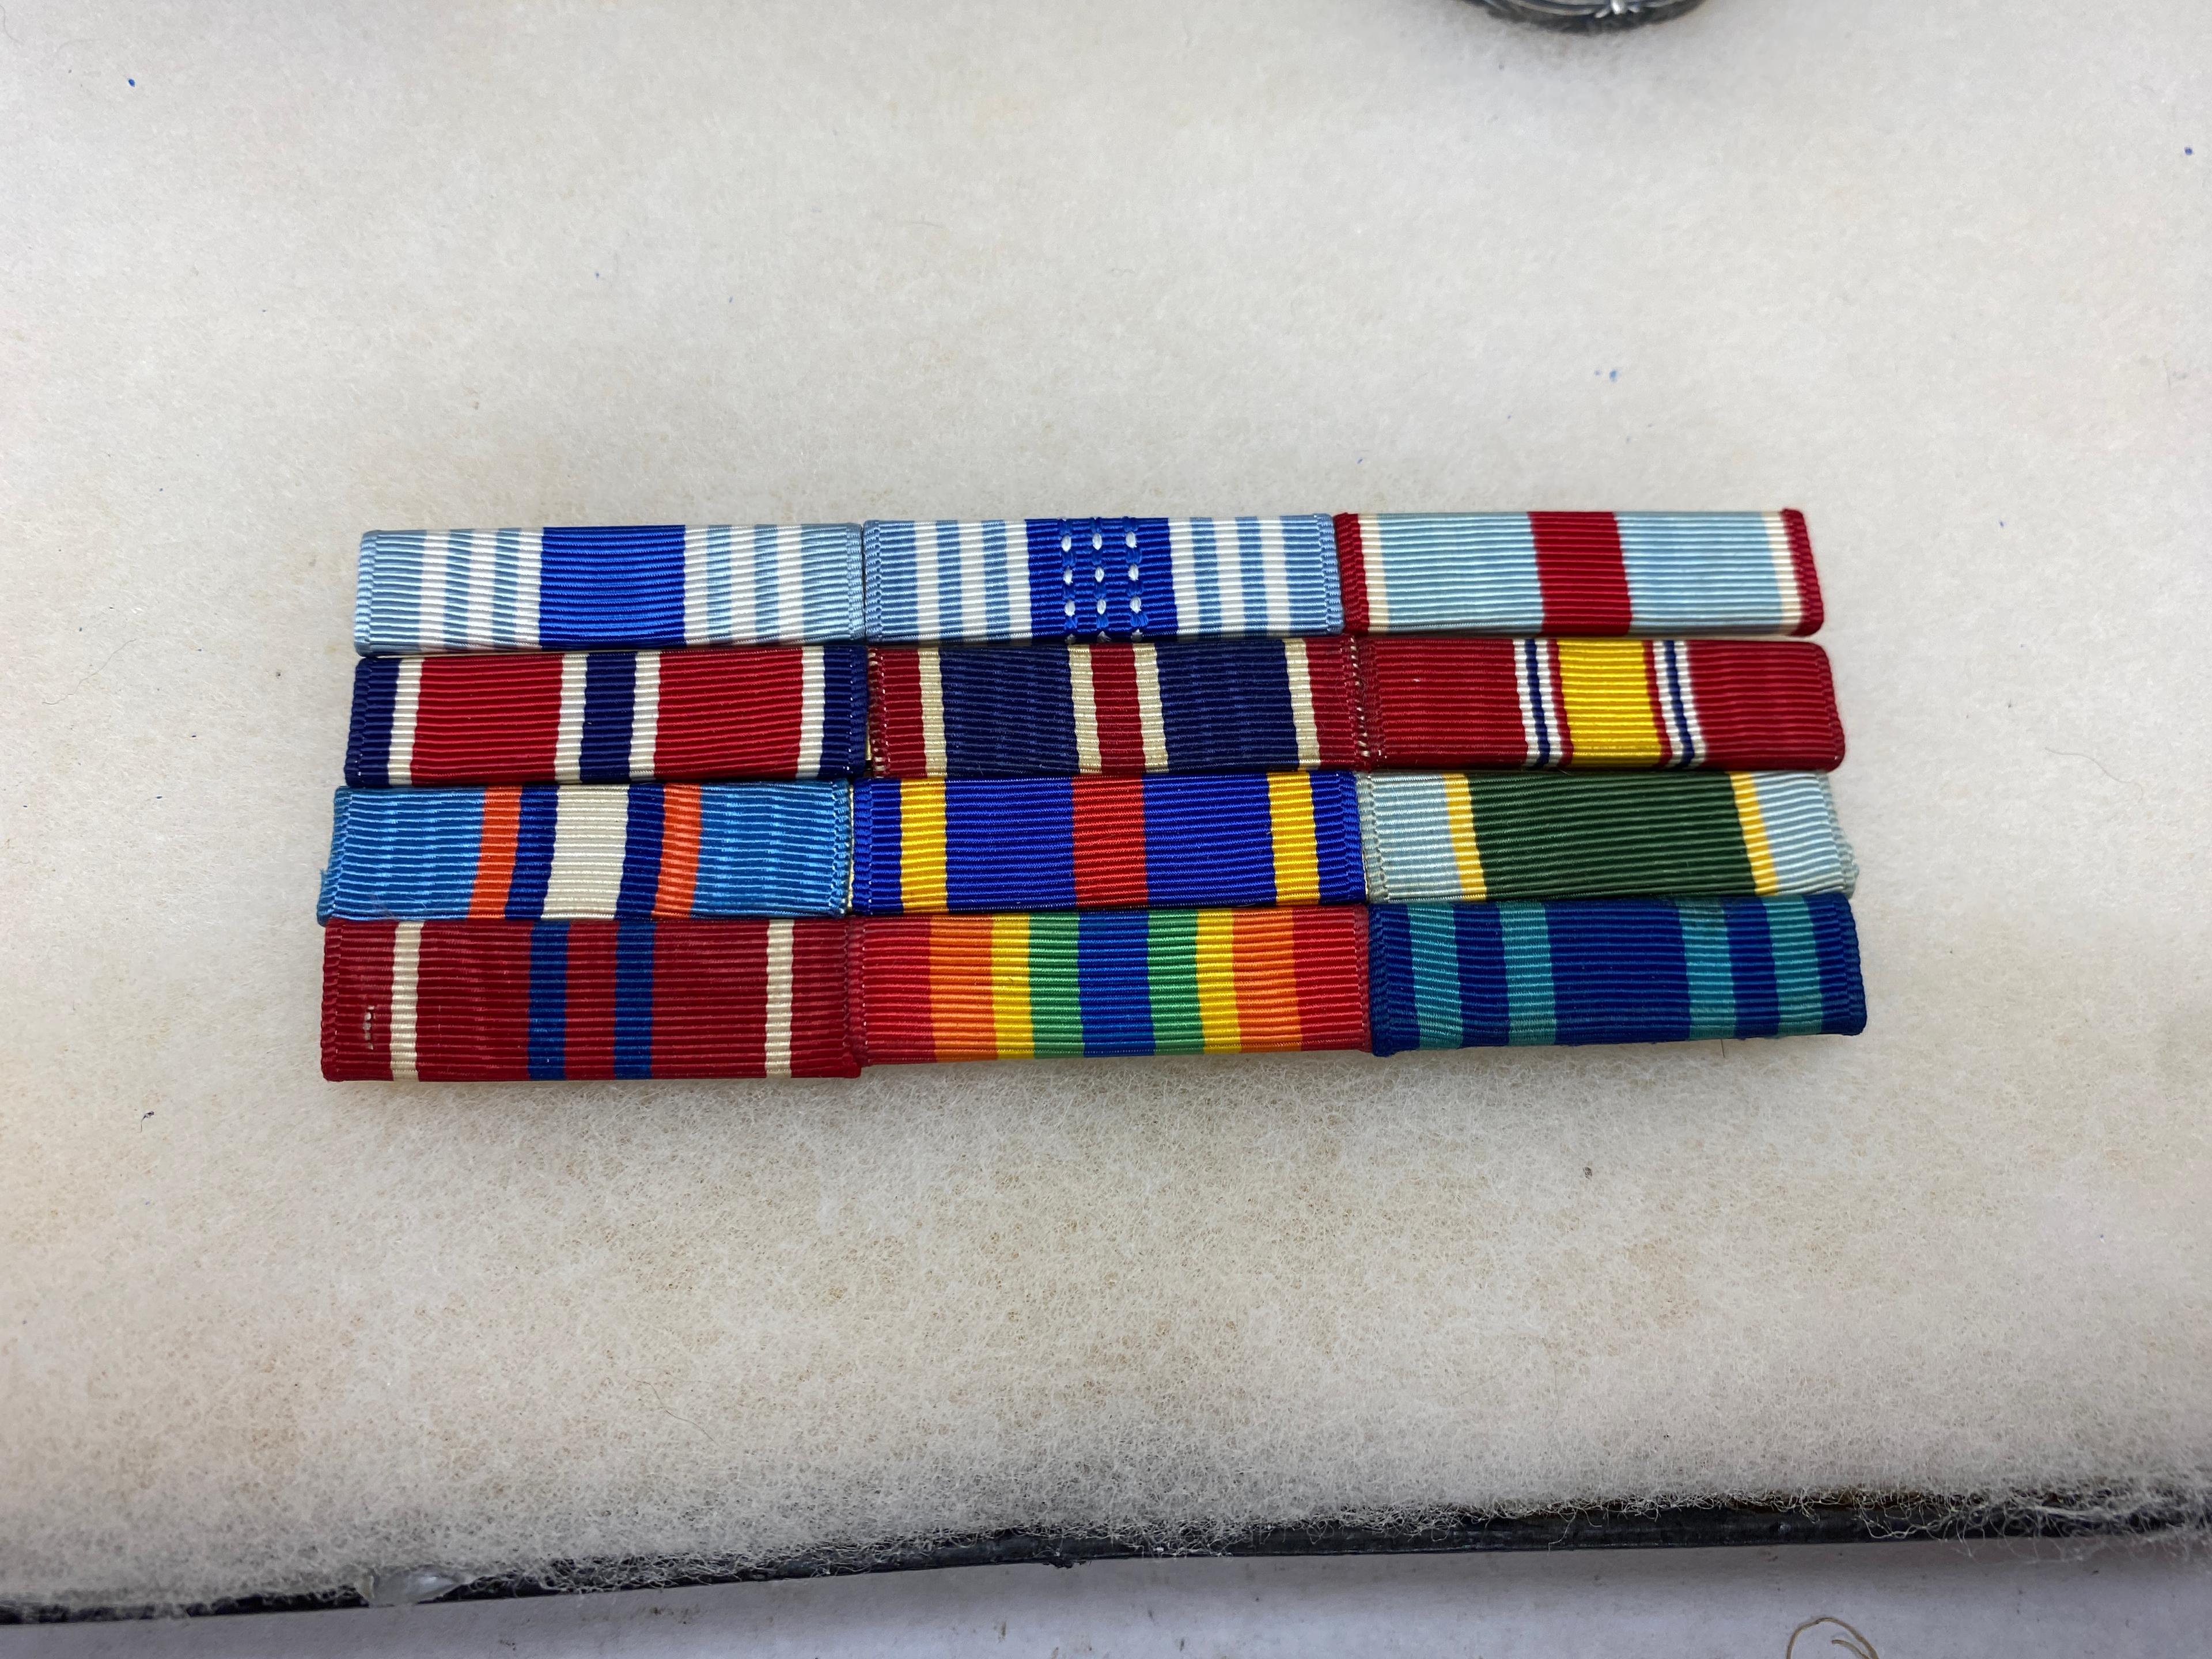 U.S. MILITARY MEDALS AND PINS